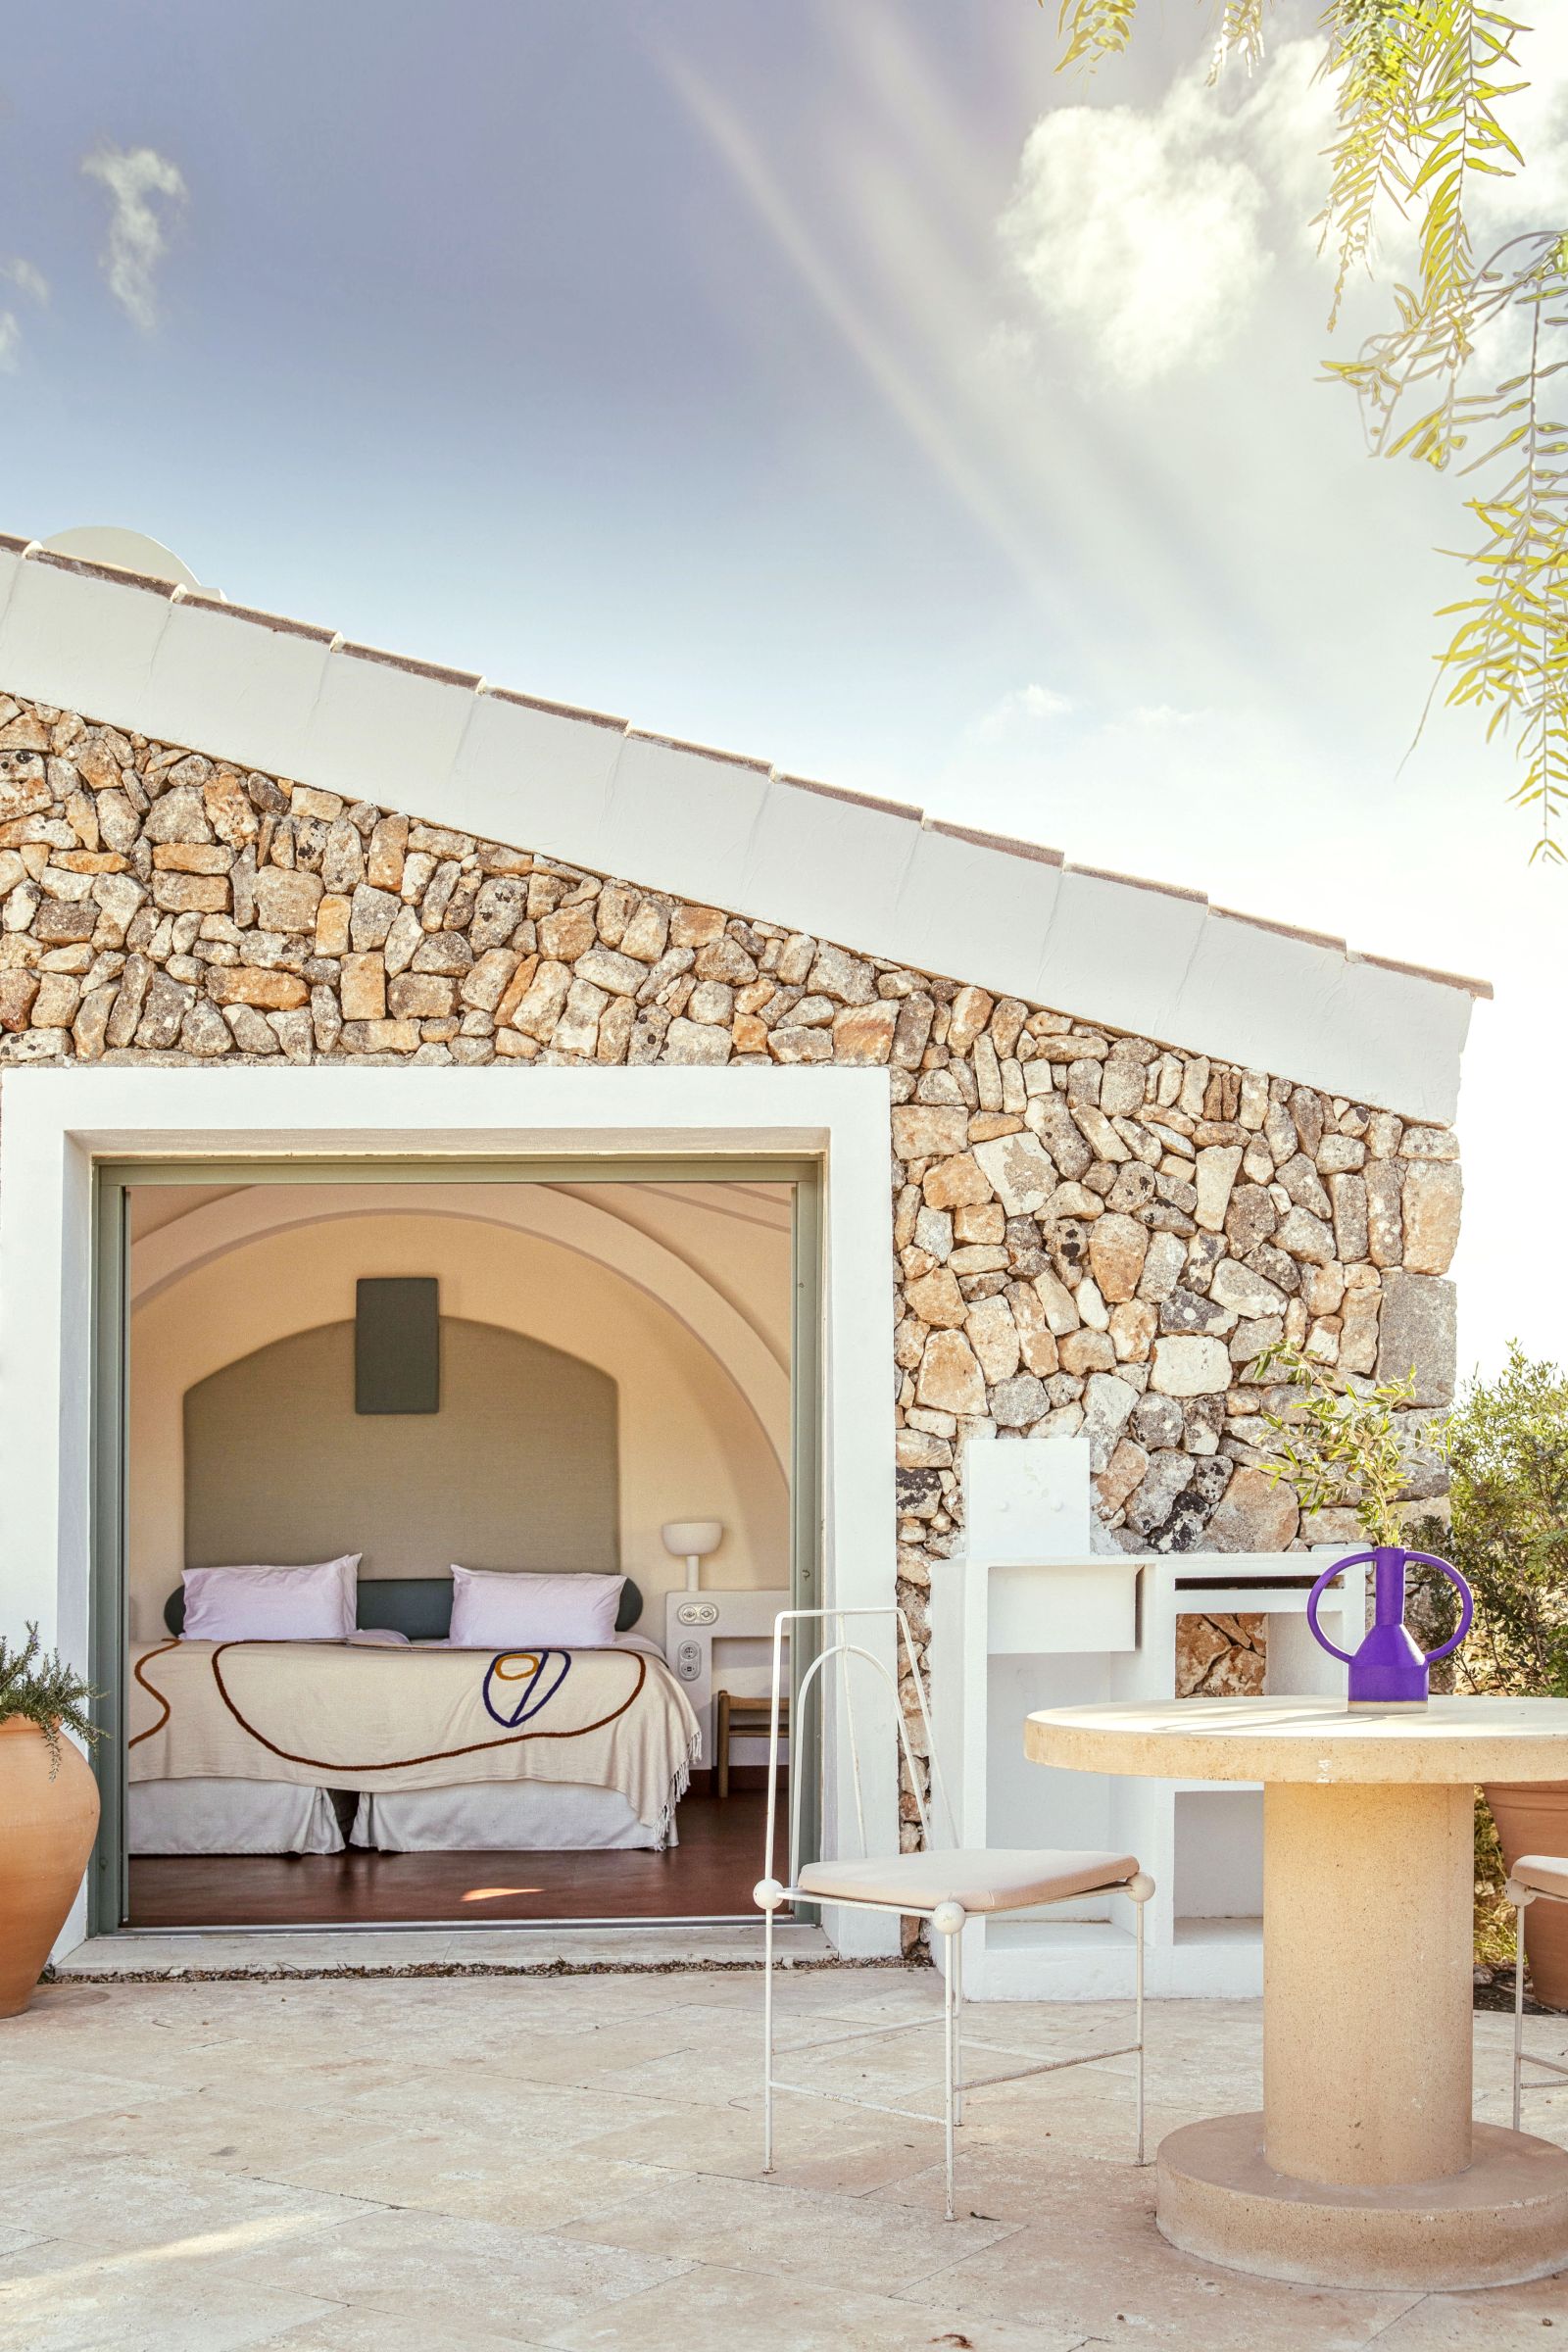 One of the villas at the Menorca Experimental hotel